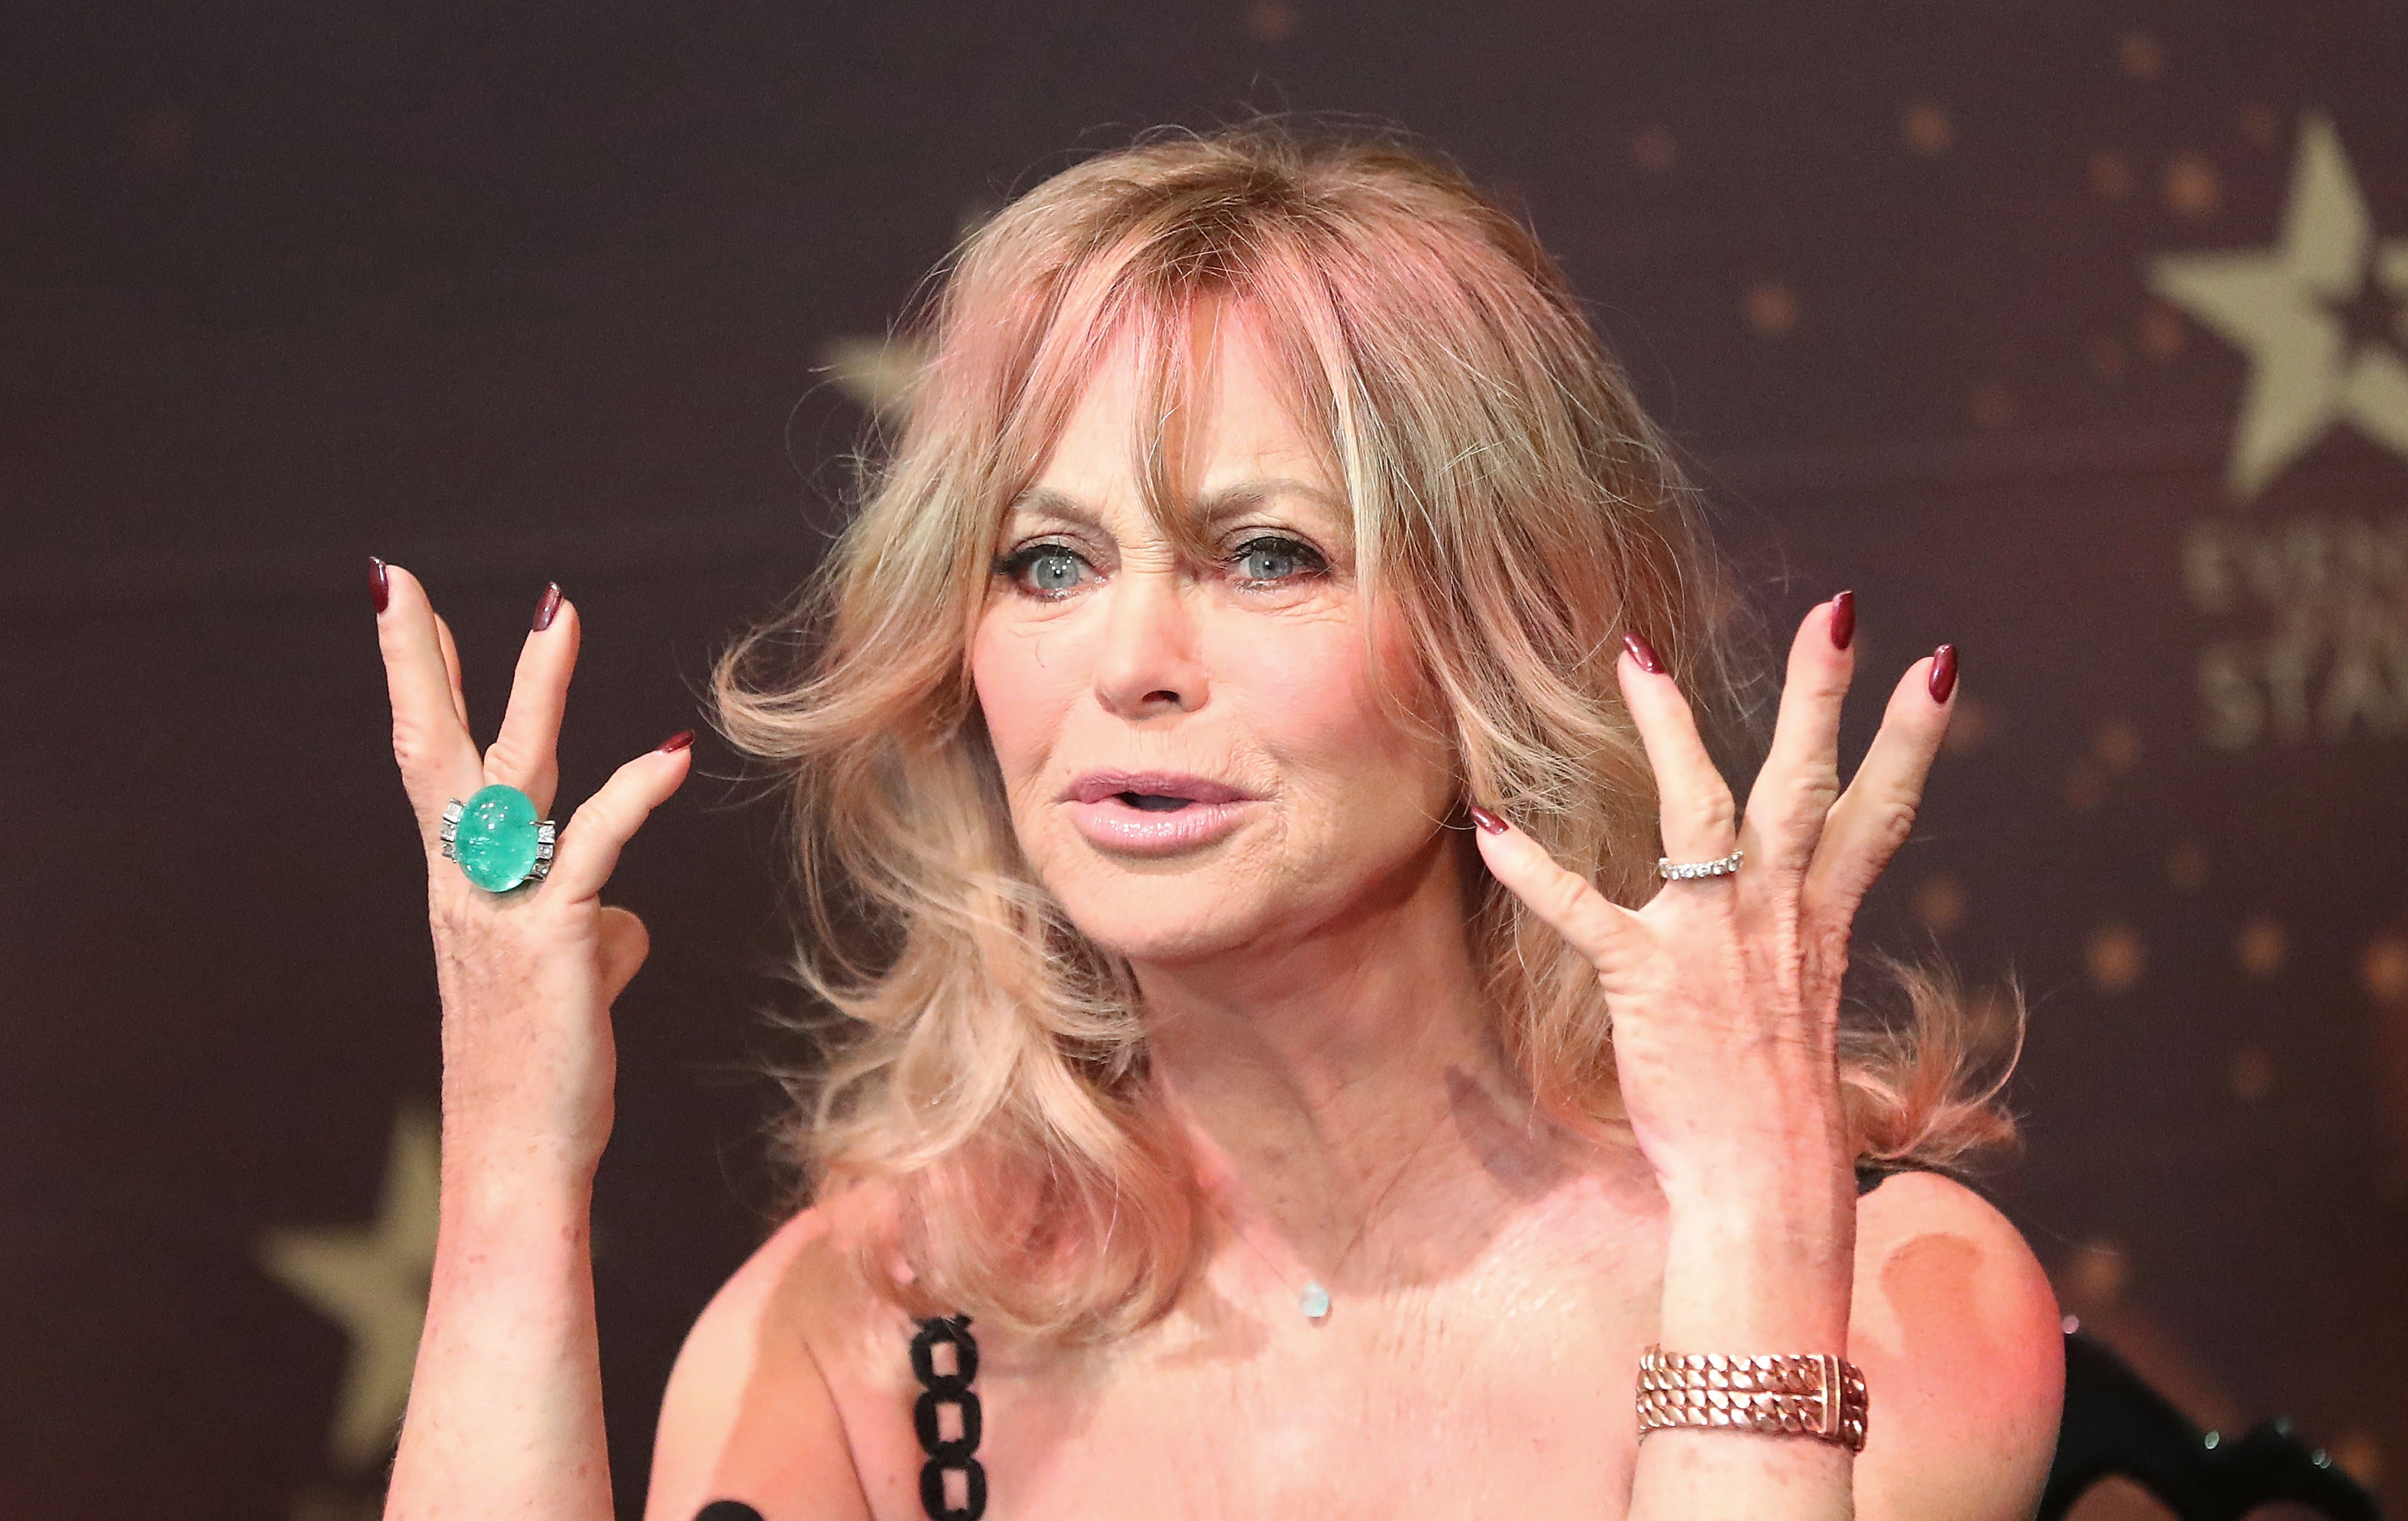 Goldie Hawn speaks during a press conference to launch her MindUP program Australia on November 14, 2016. | Source: Getty Images